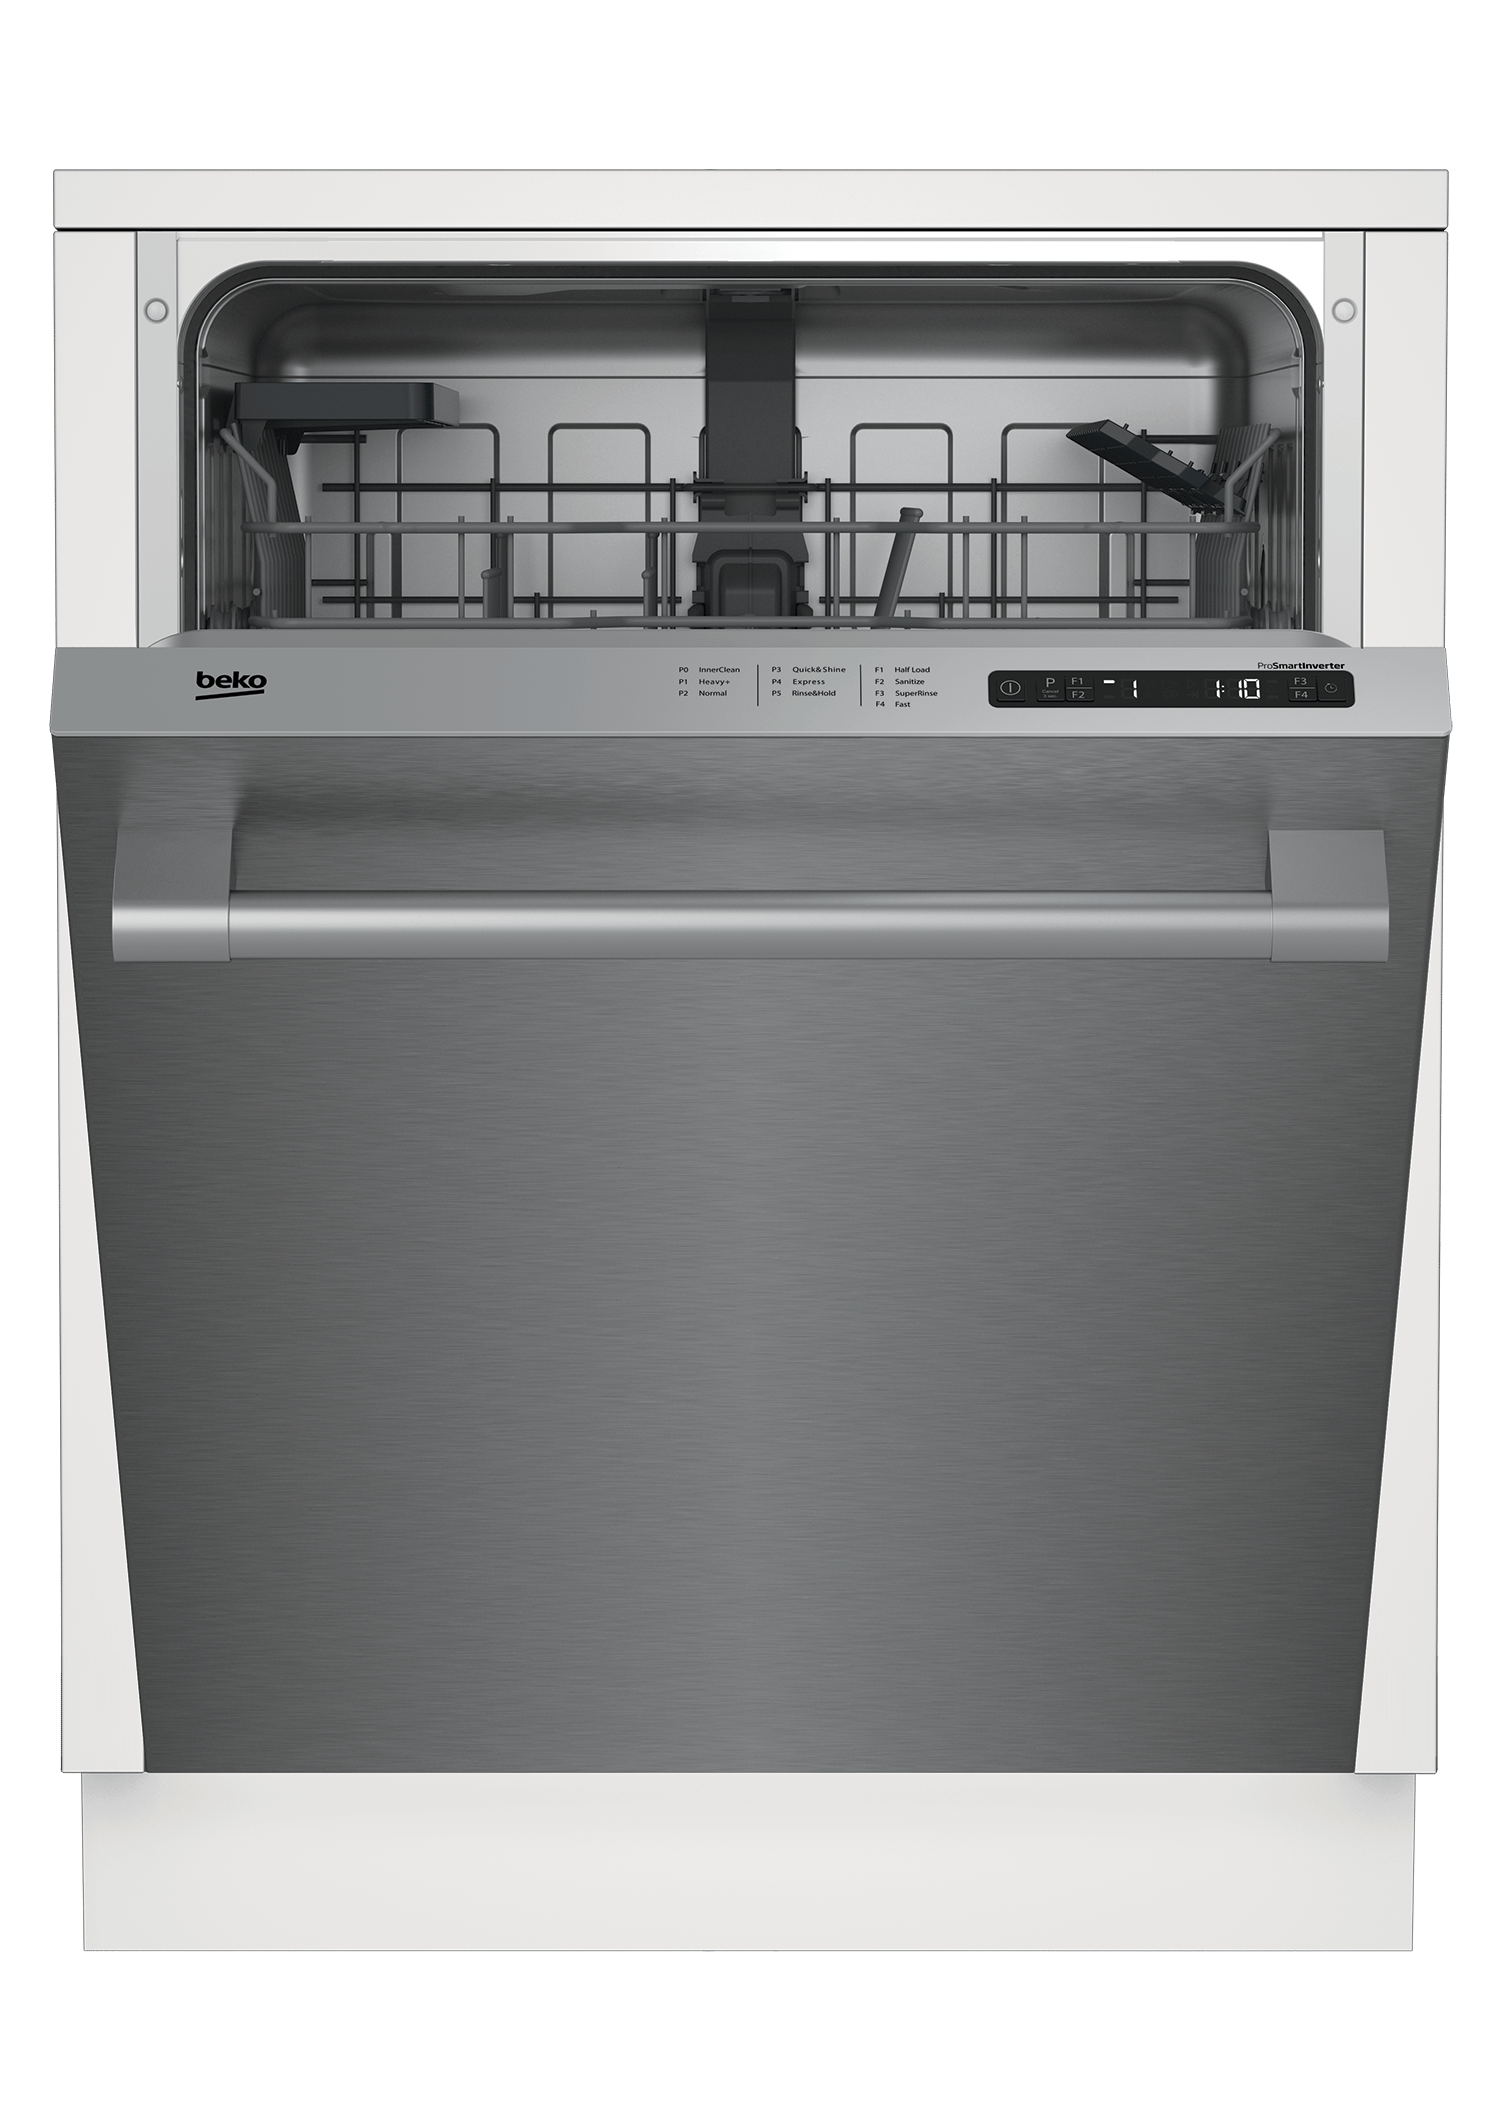 Beko Tall Tub Stainless Dishwasher, 14 place settings, 48 dBa, Top Control